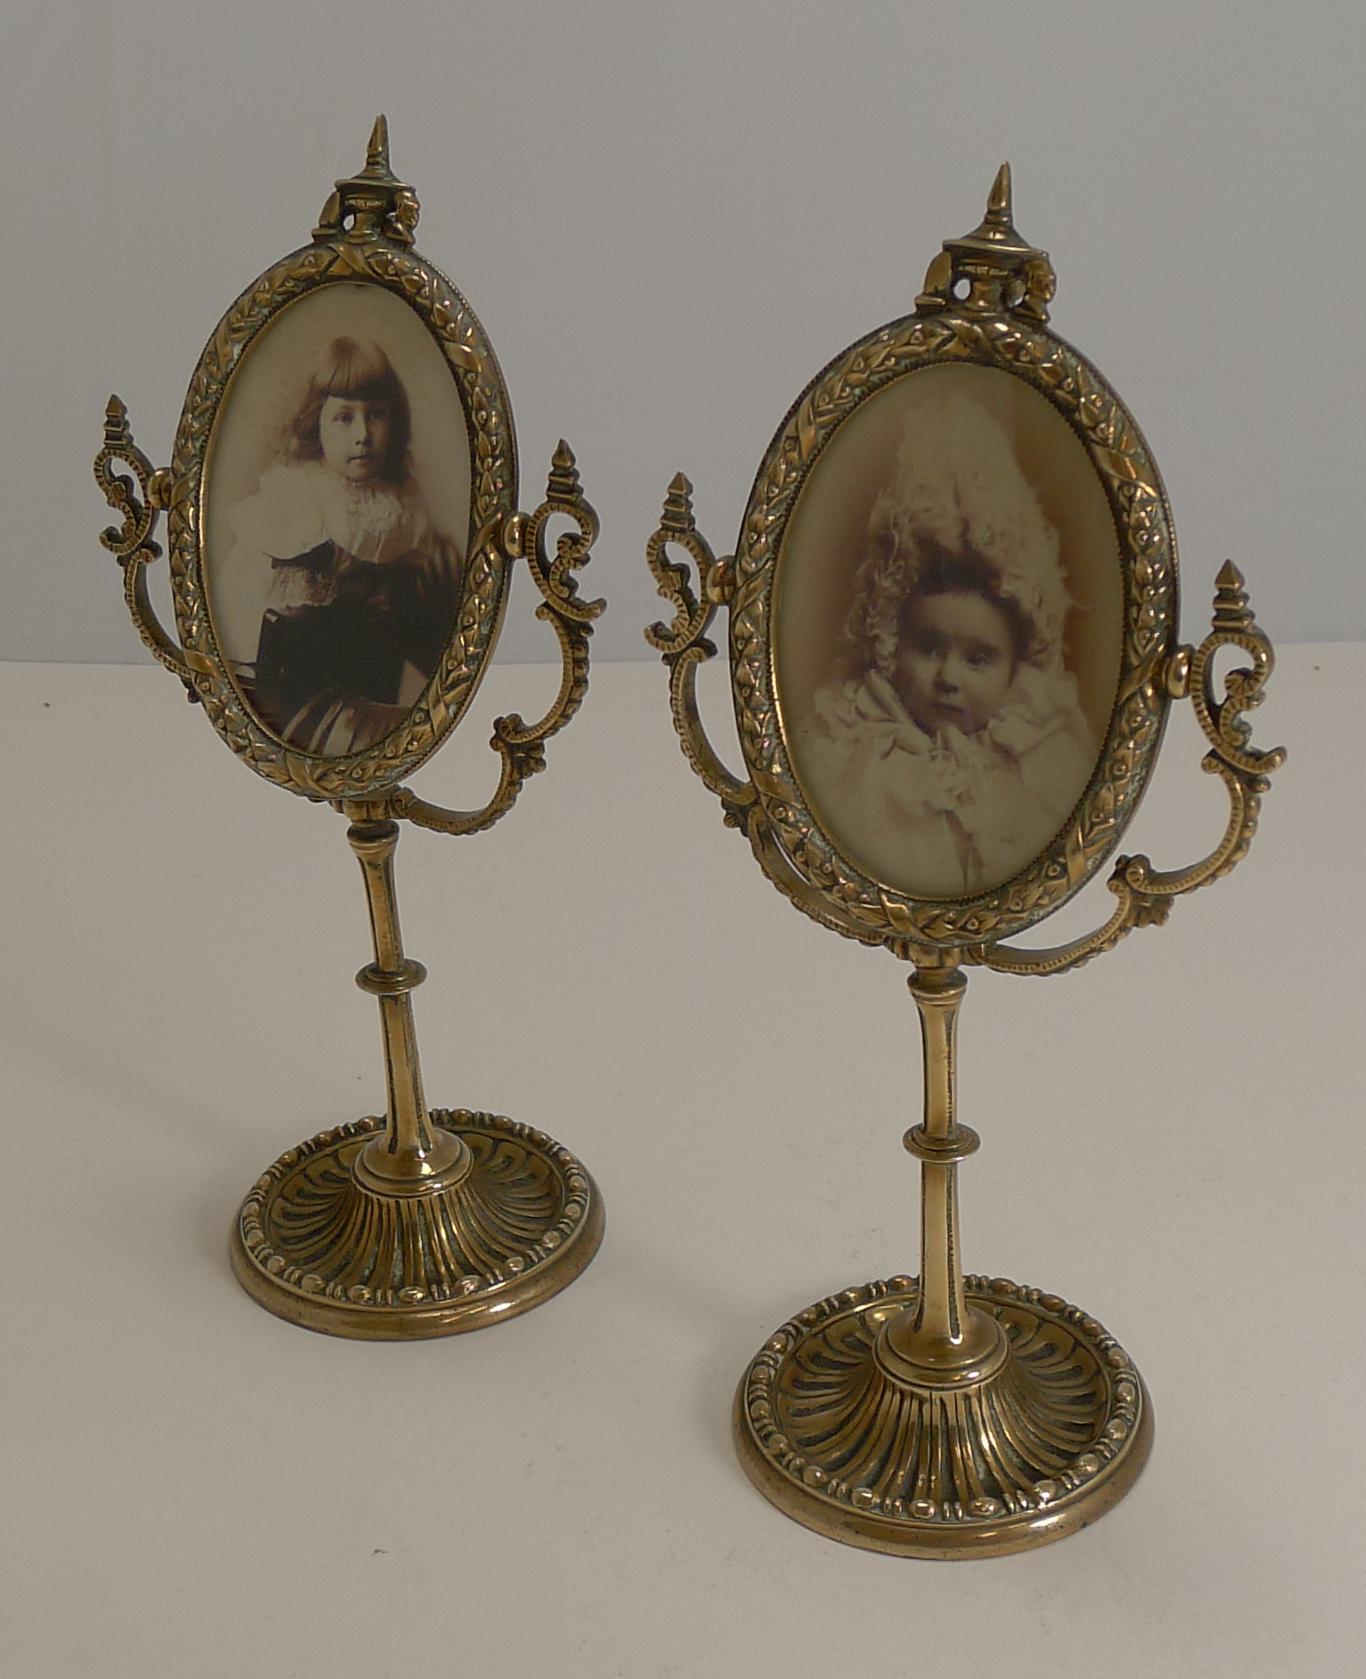 A most unusual and highly decorative pair of English Victorian photograph frames made from solid cast brass. The frames themselves are adjustable within the outer stand.

The bars at the back are unscrewed to allow the backs to be removed to